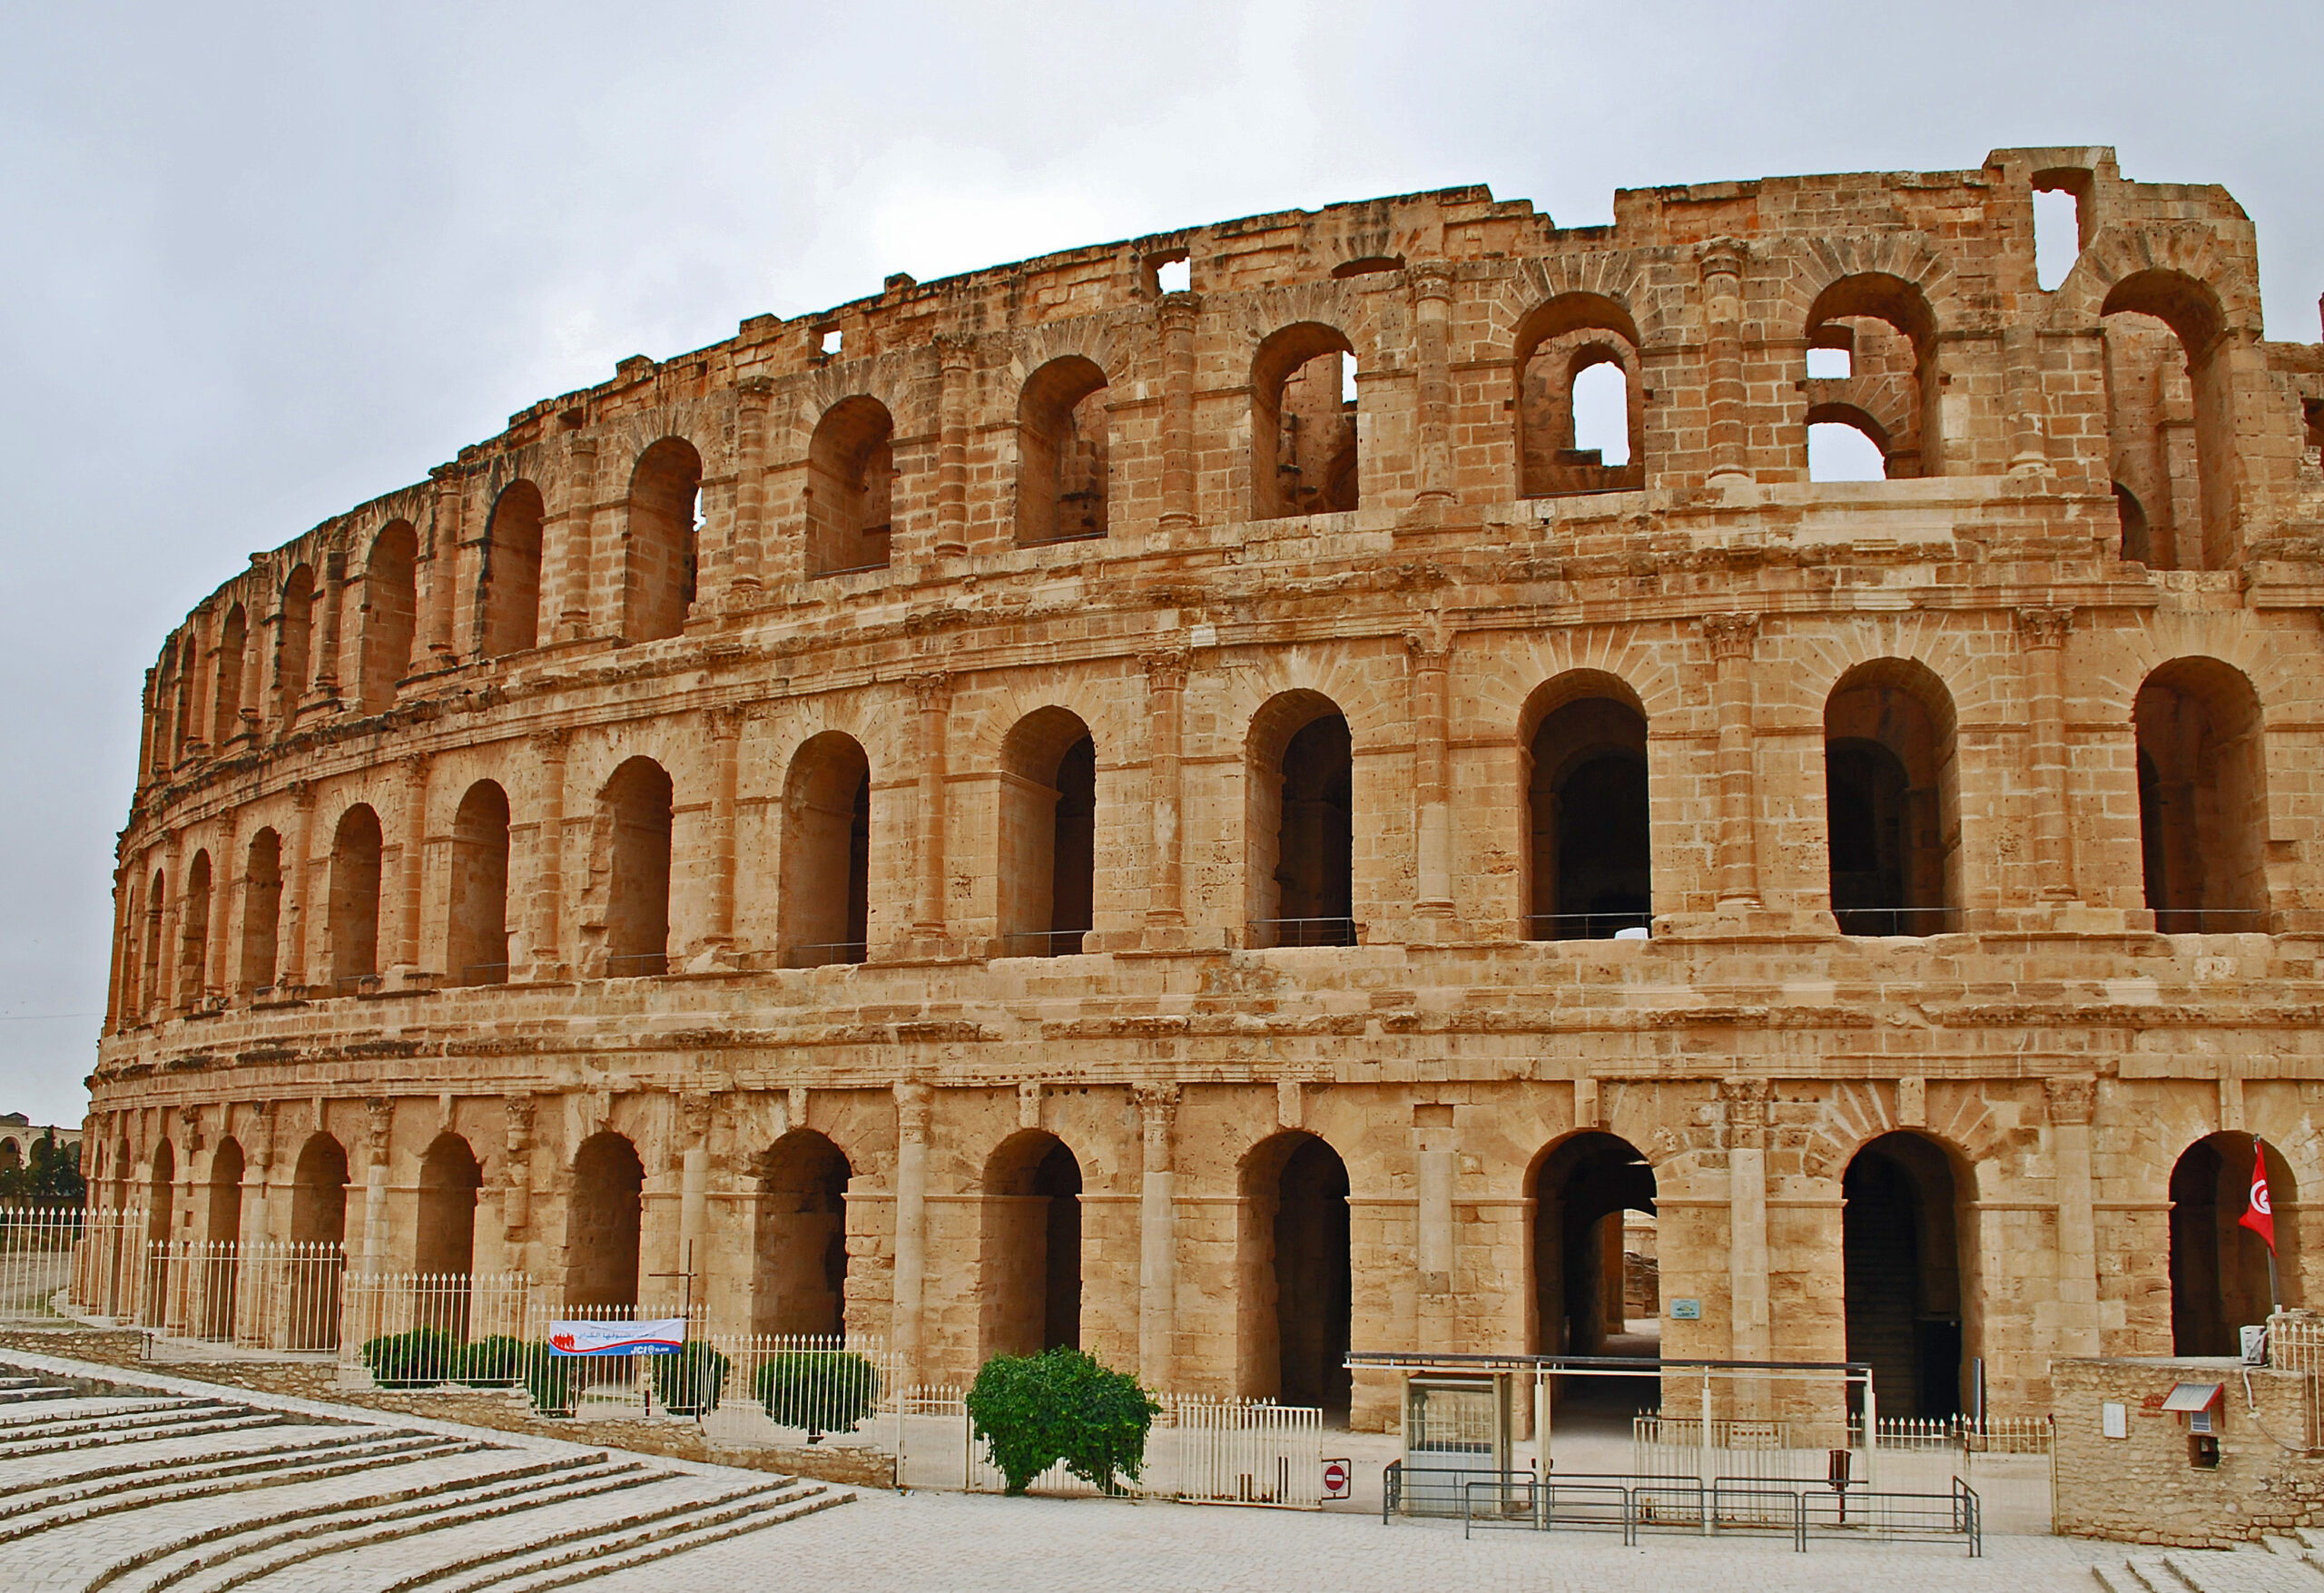 The amphitheater at El Djem (Thysdrus), Tunisia, one of the empire's largest, was declared a UNESCO World Heritage site in 1979. Constructed in the 3rd century C.E., 148 x 122 m (photo: Kirk k, CC BY-NC-ND 2.0)